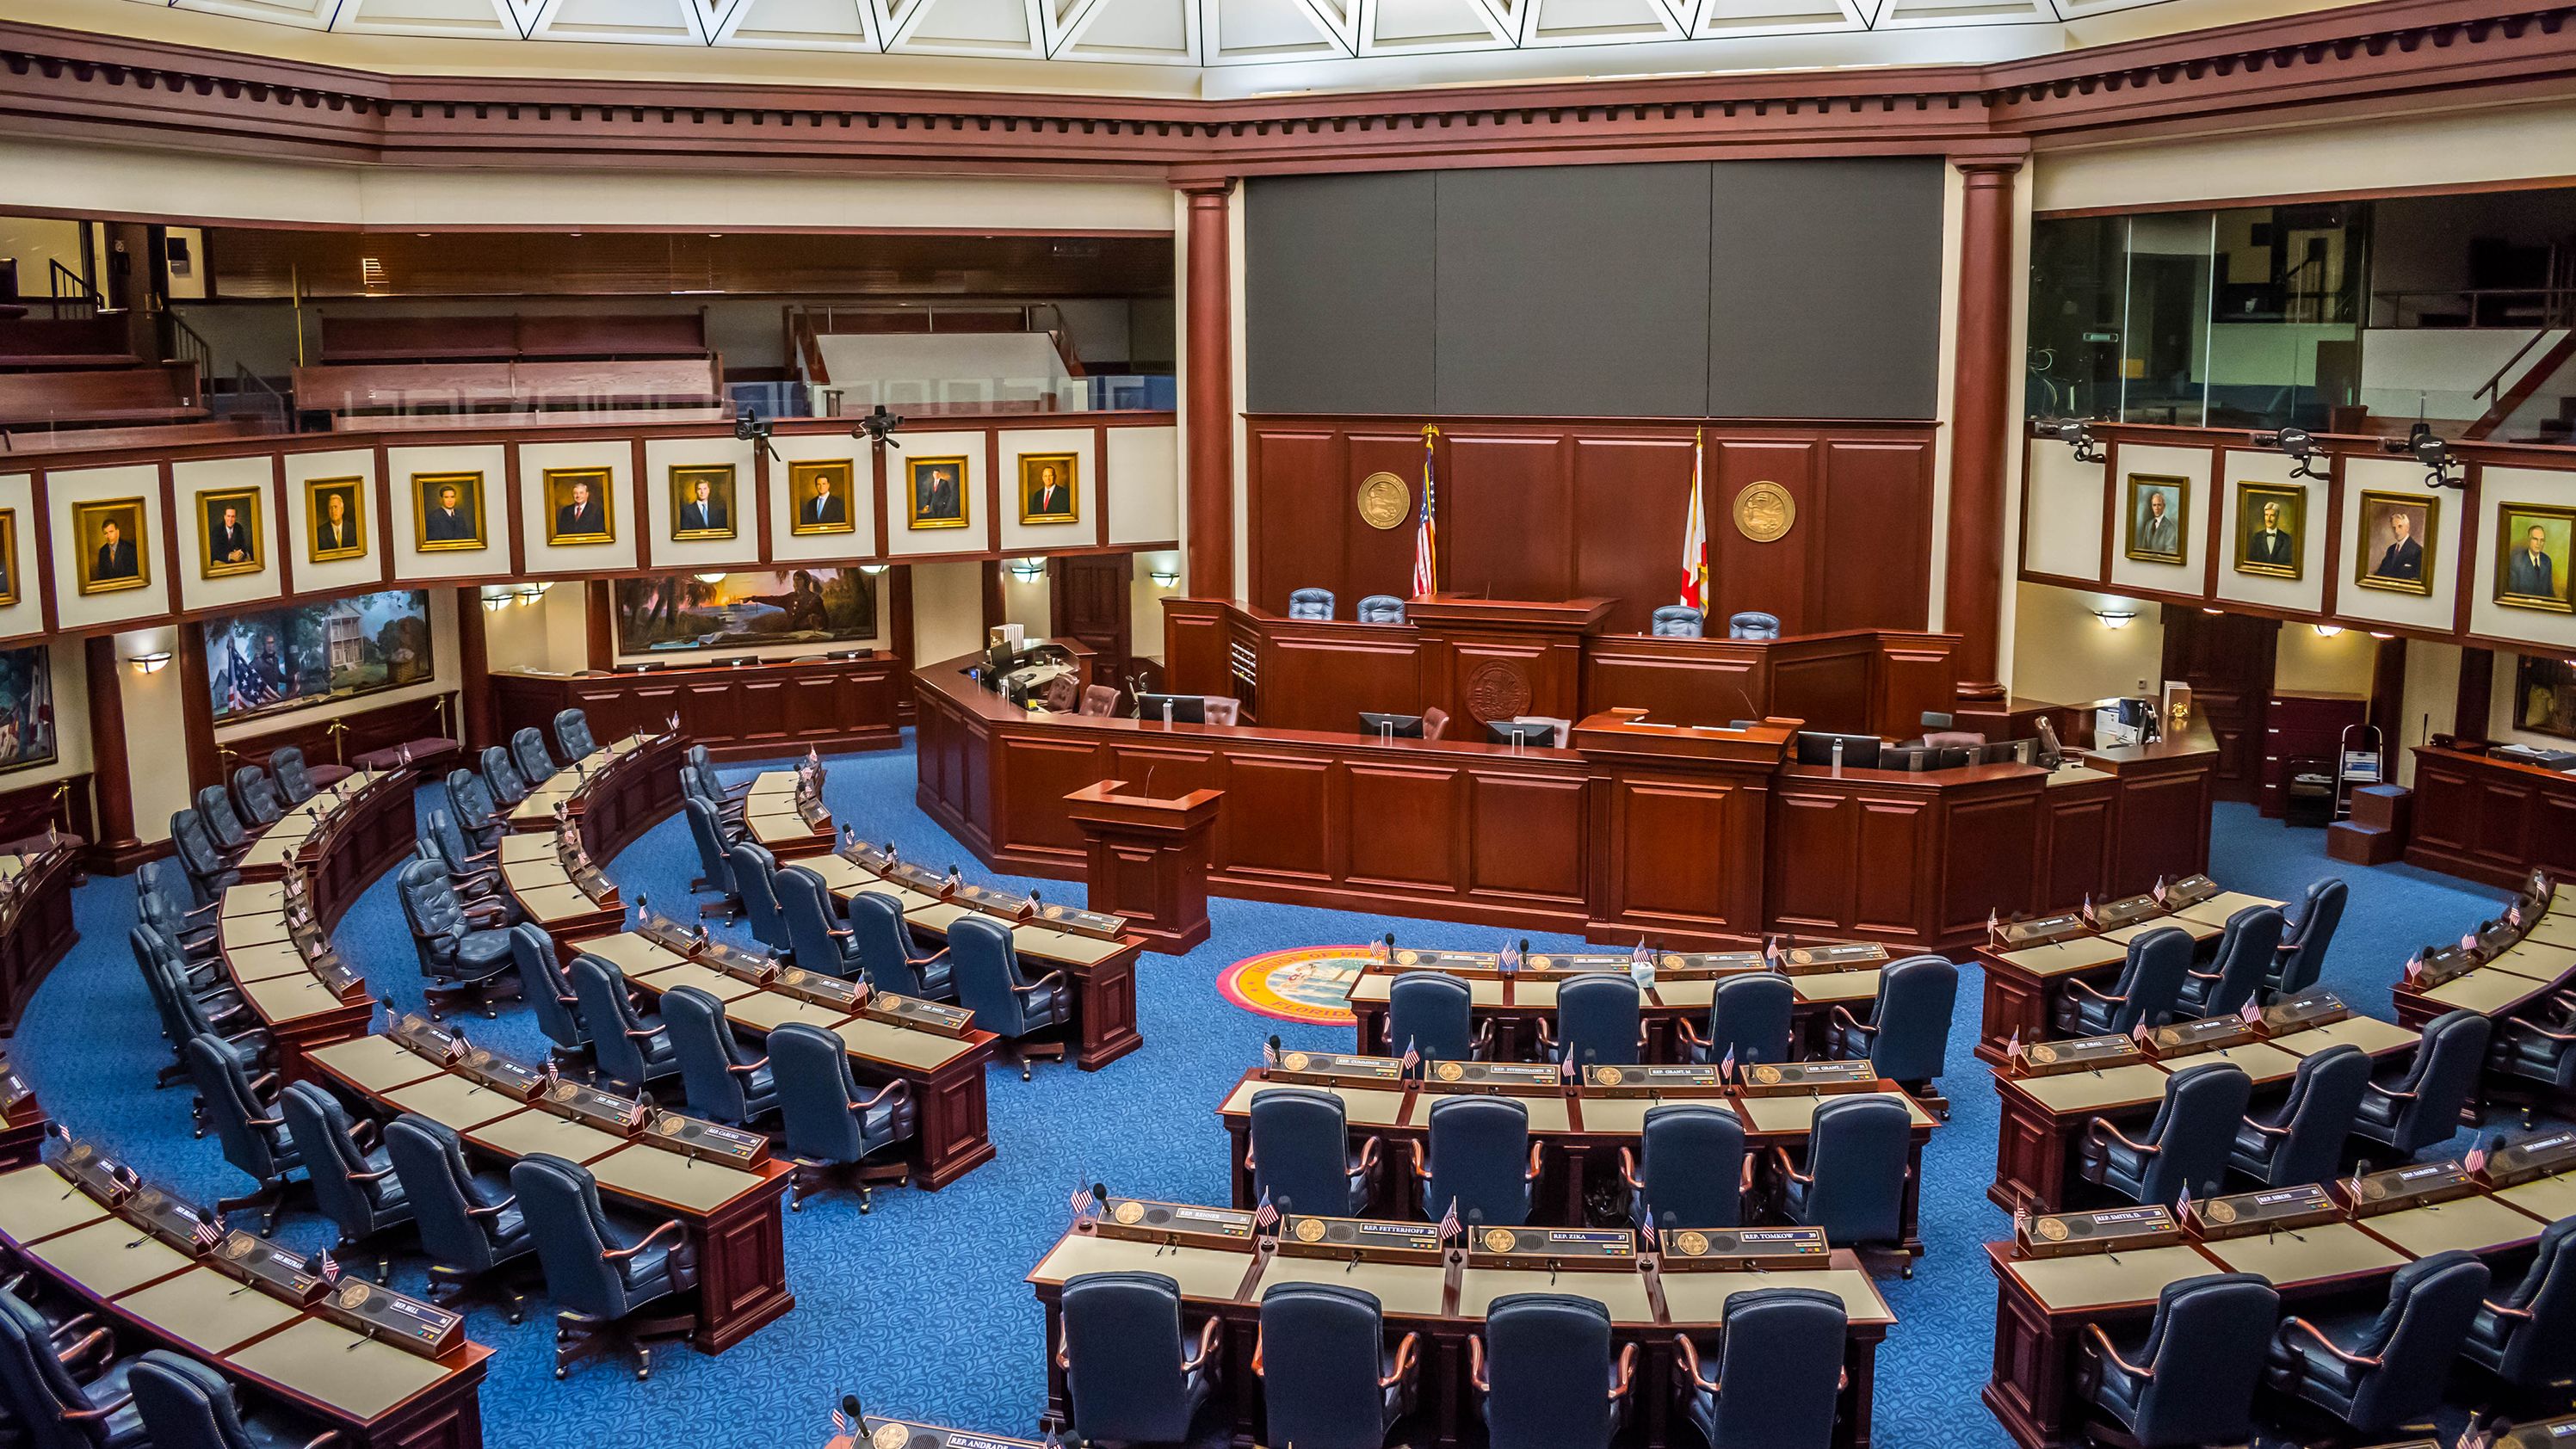 The Florida Senate chamber is seen in this file photo.